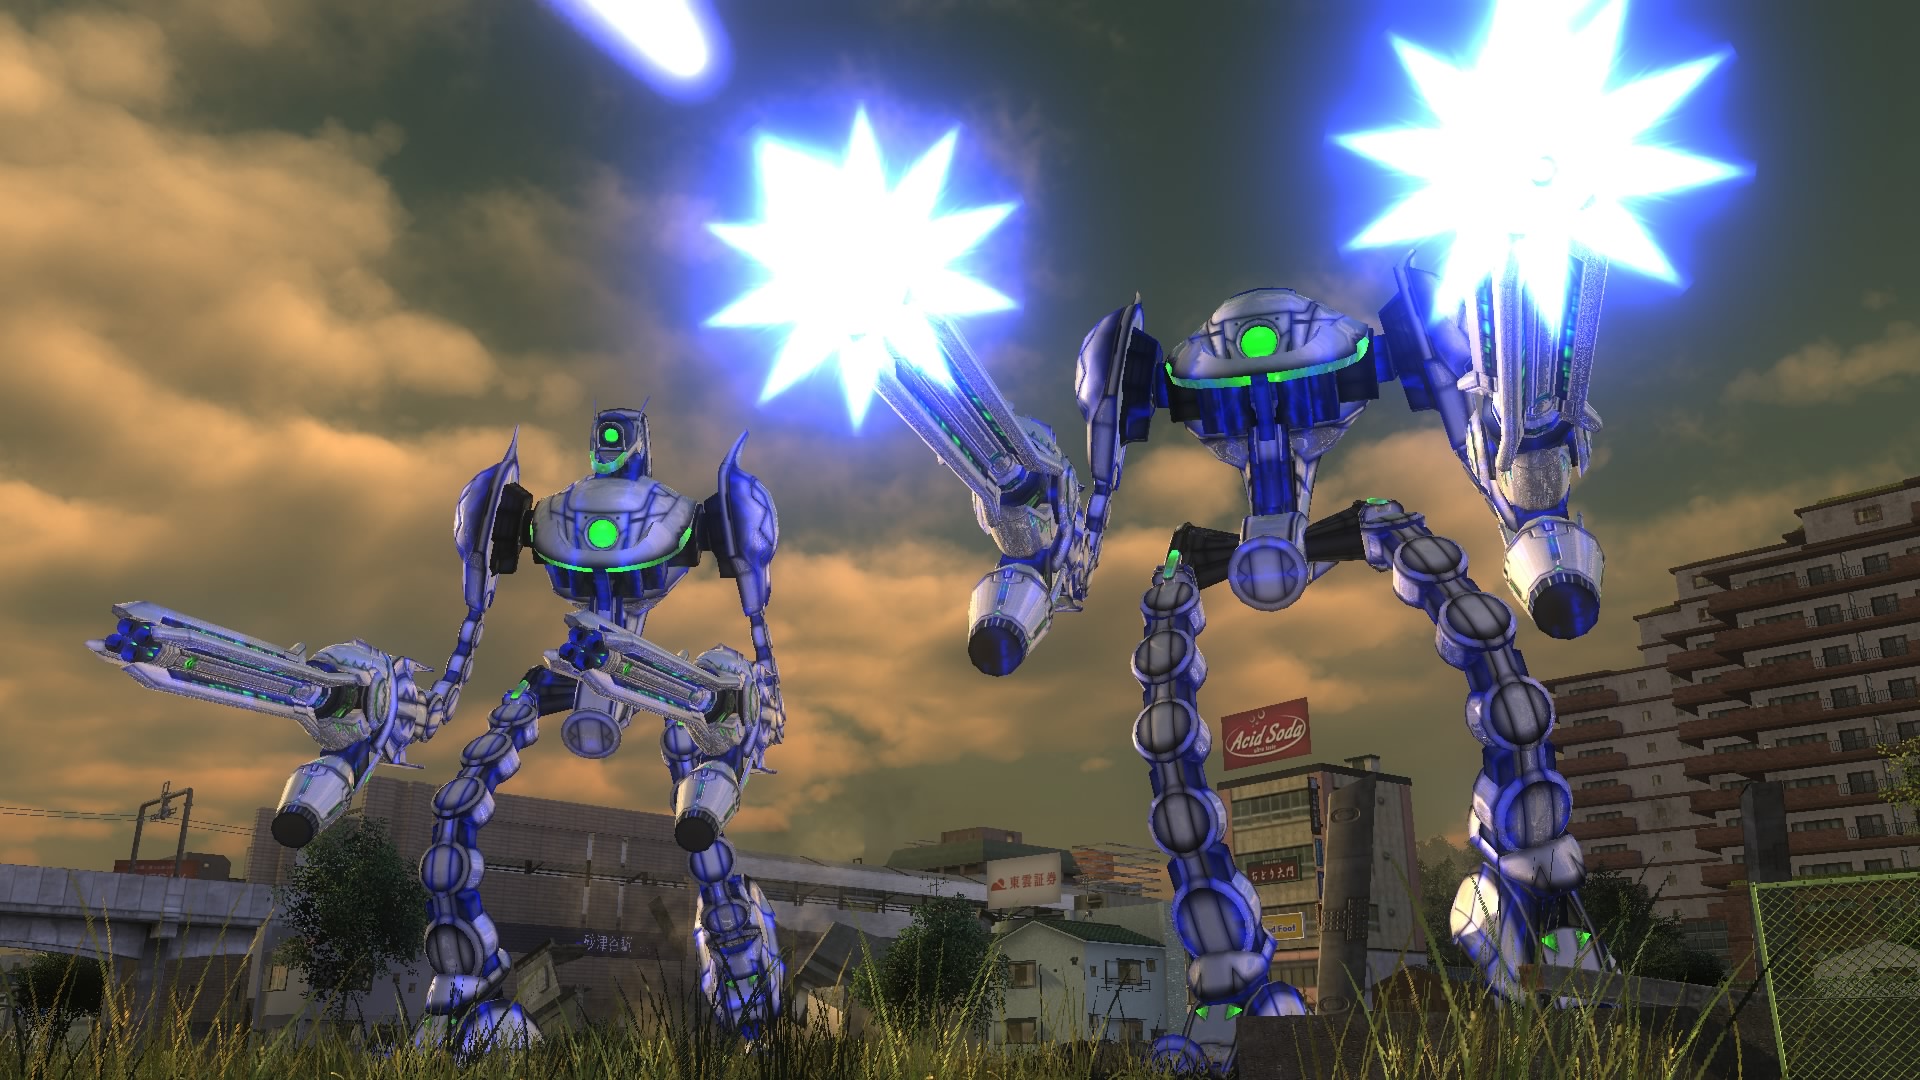 4.1ӰϮEarth Defense Force 4.1: The Shadow of New Despairv1.0޸Ӱ